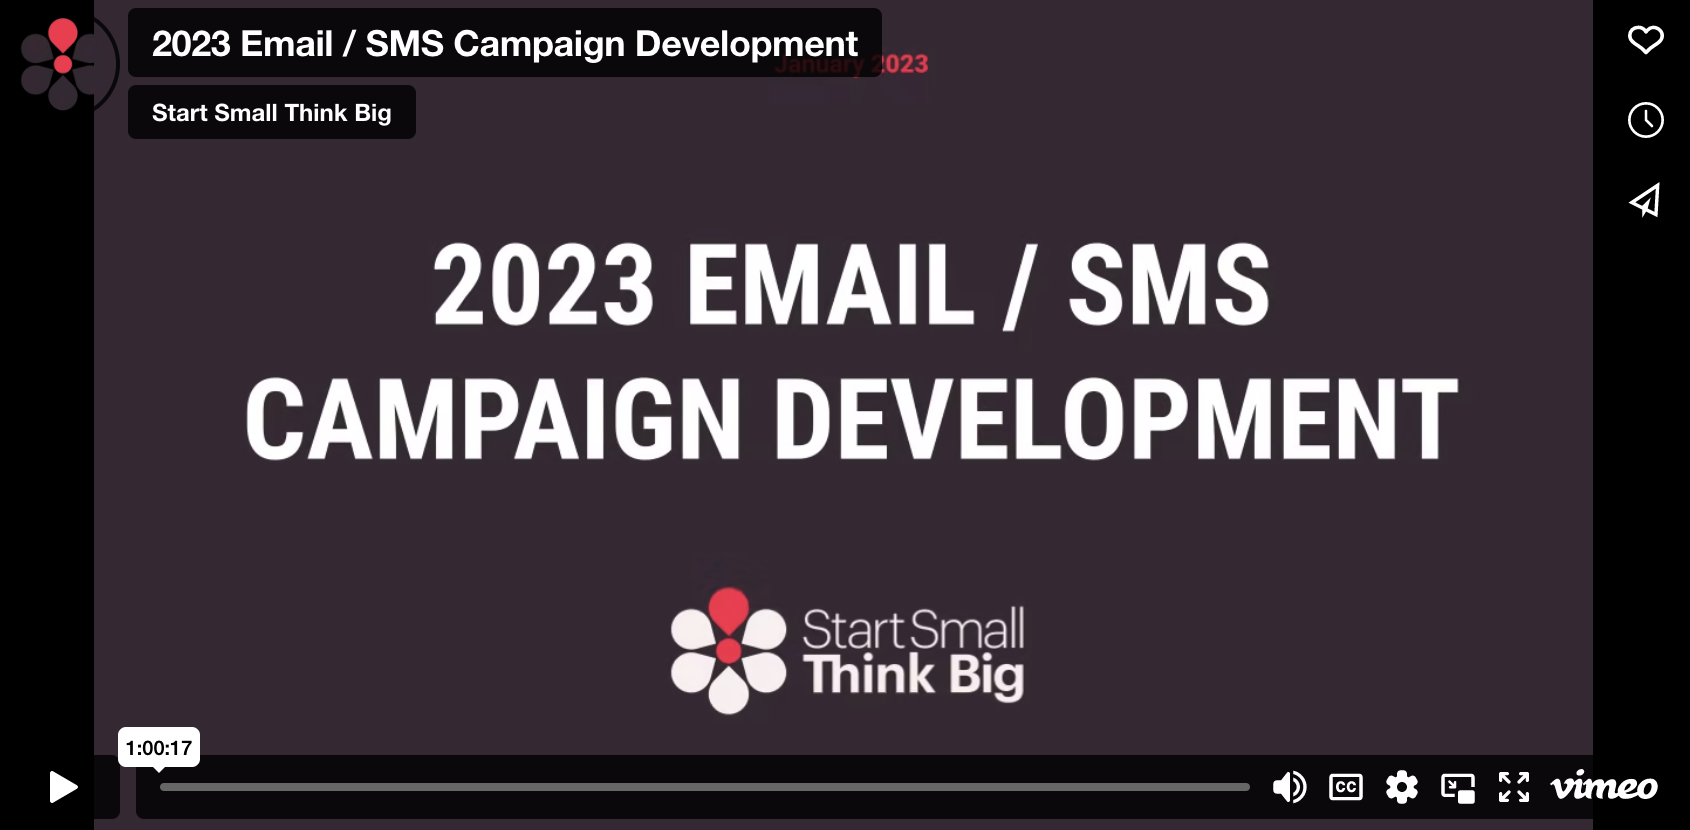 2023 Email / SMS Campaign Development